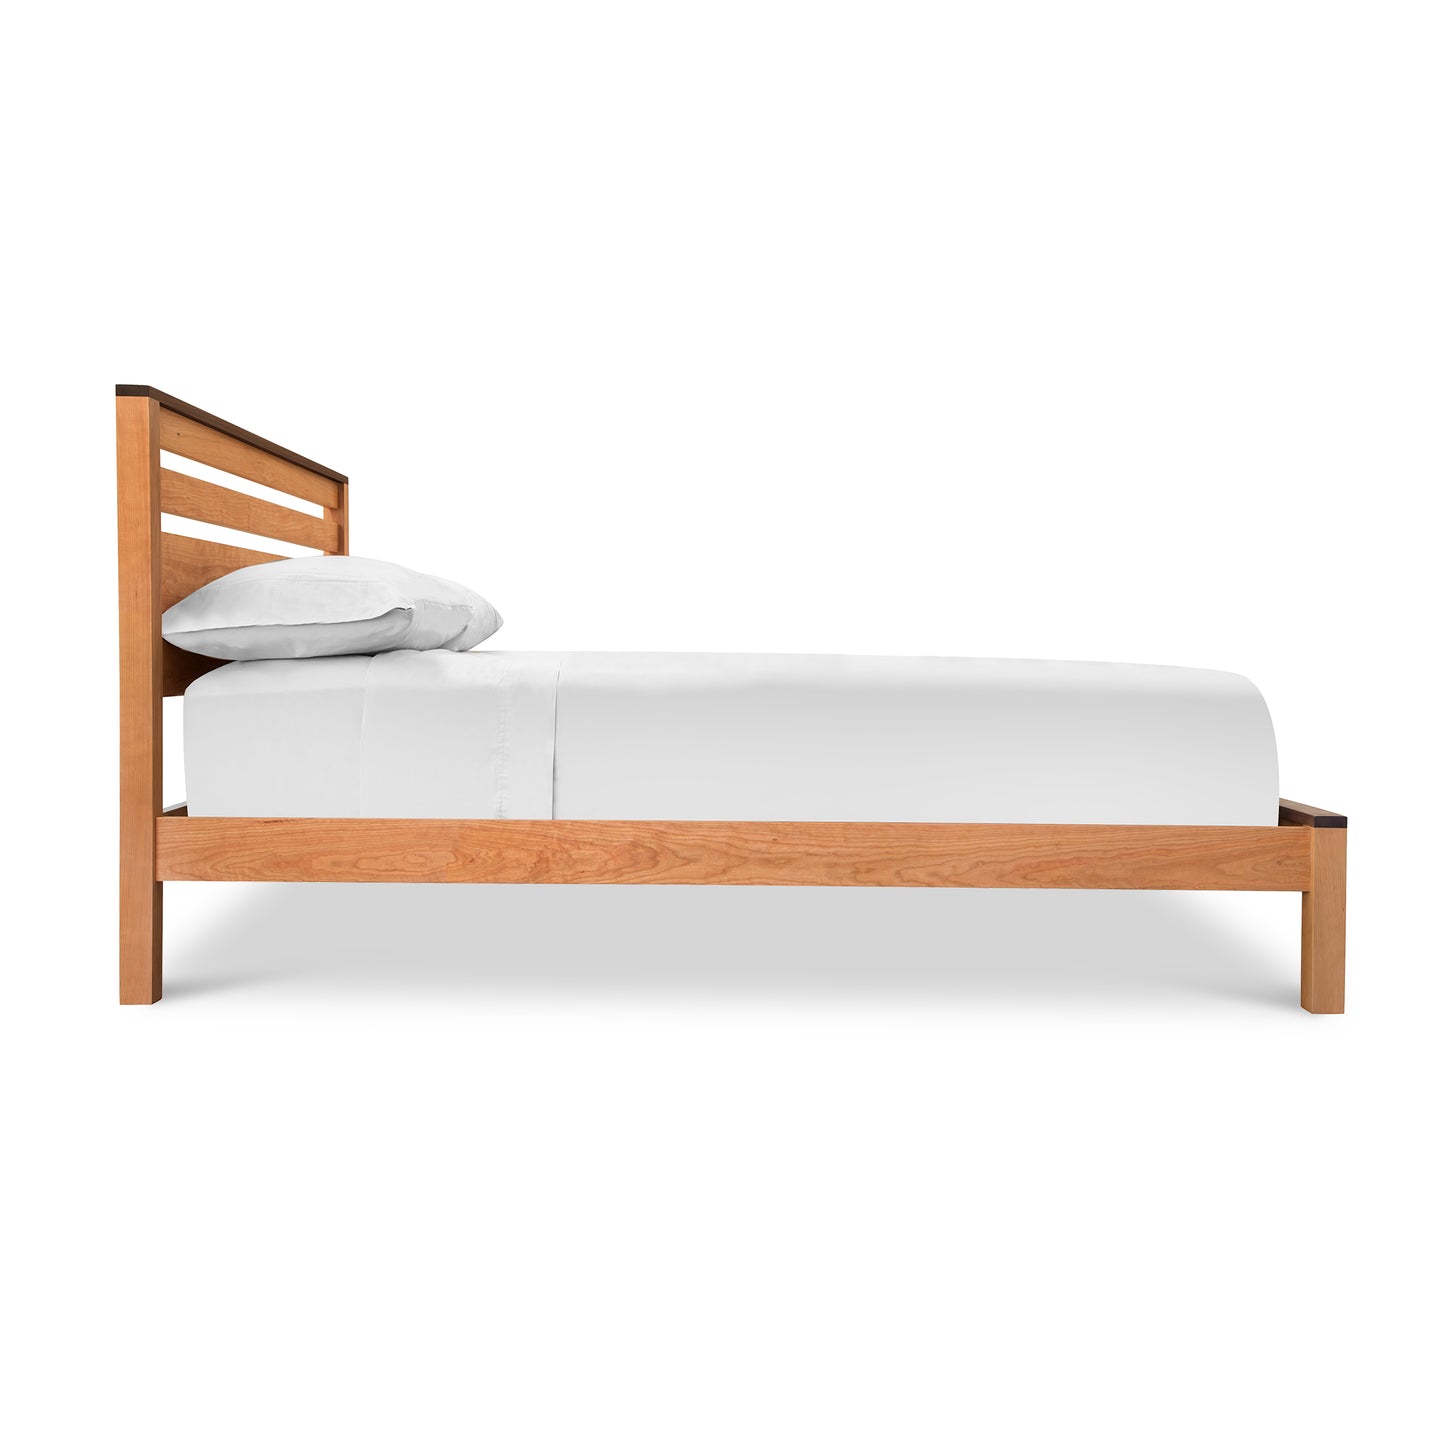 A single Skyline Panel Bed made of solid Cherry wood by Vermont Furniture Designs with an eco-friendly white mattress cover and a pillow against a white background.